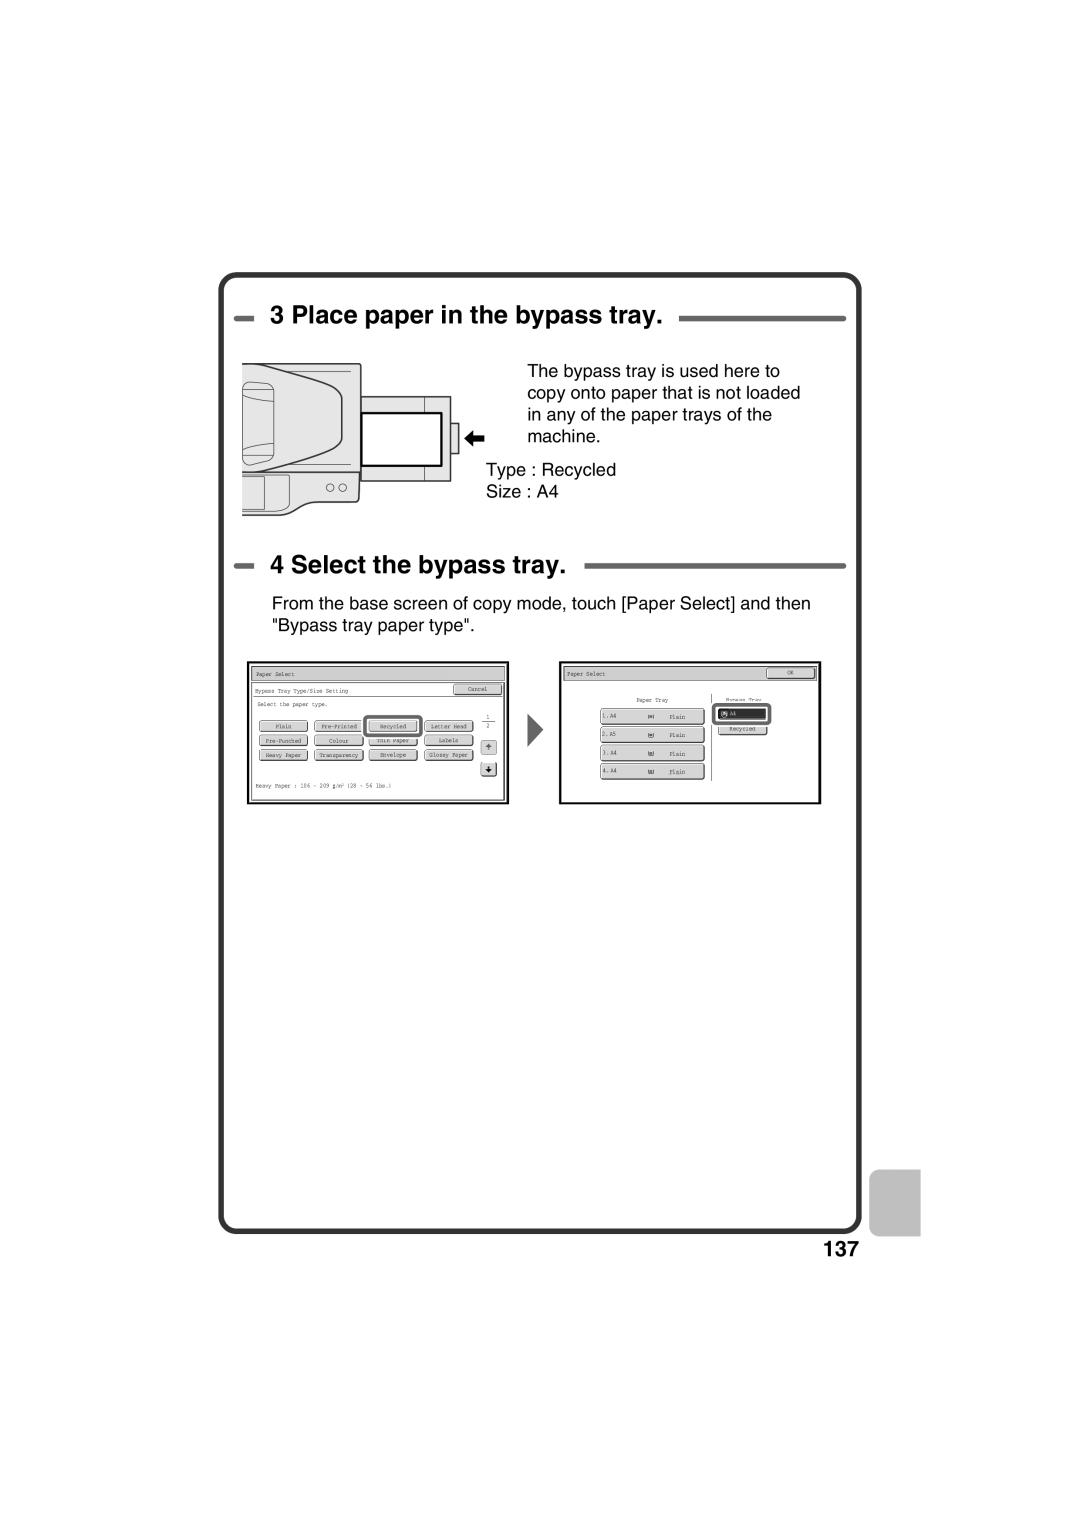 Sharp MX-C381, MX-C311 quick start Place paper in the bypass tray, Select the bypass tray 